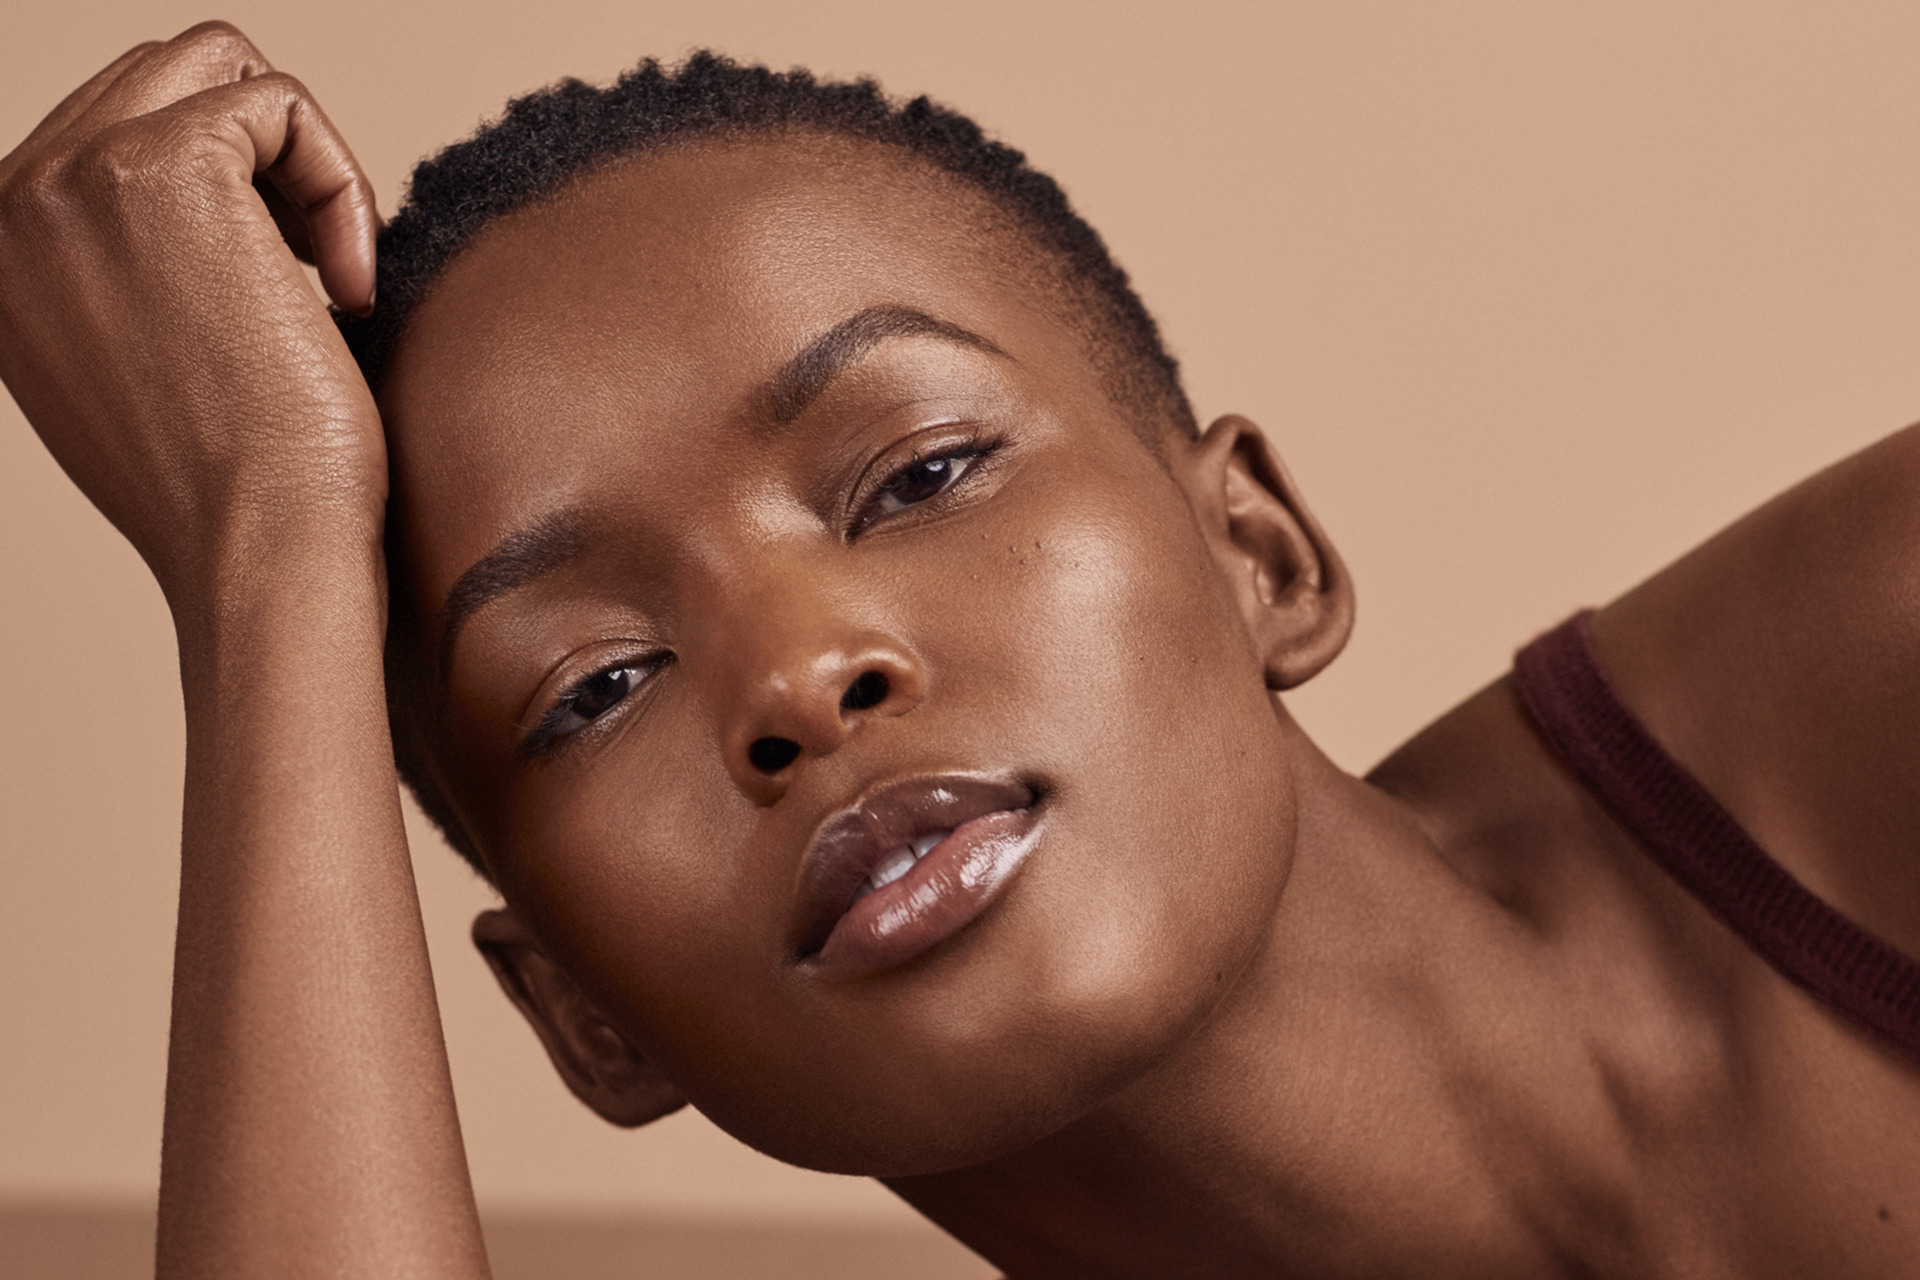 Could You Be The New Face Of Fenty Beauty? - Health & Beauty